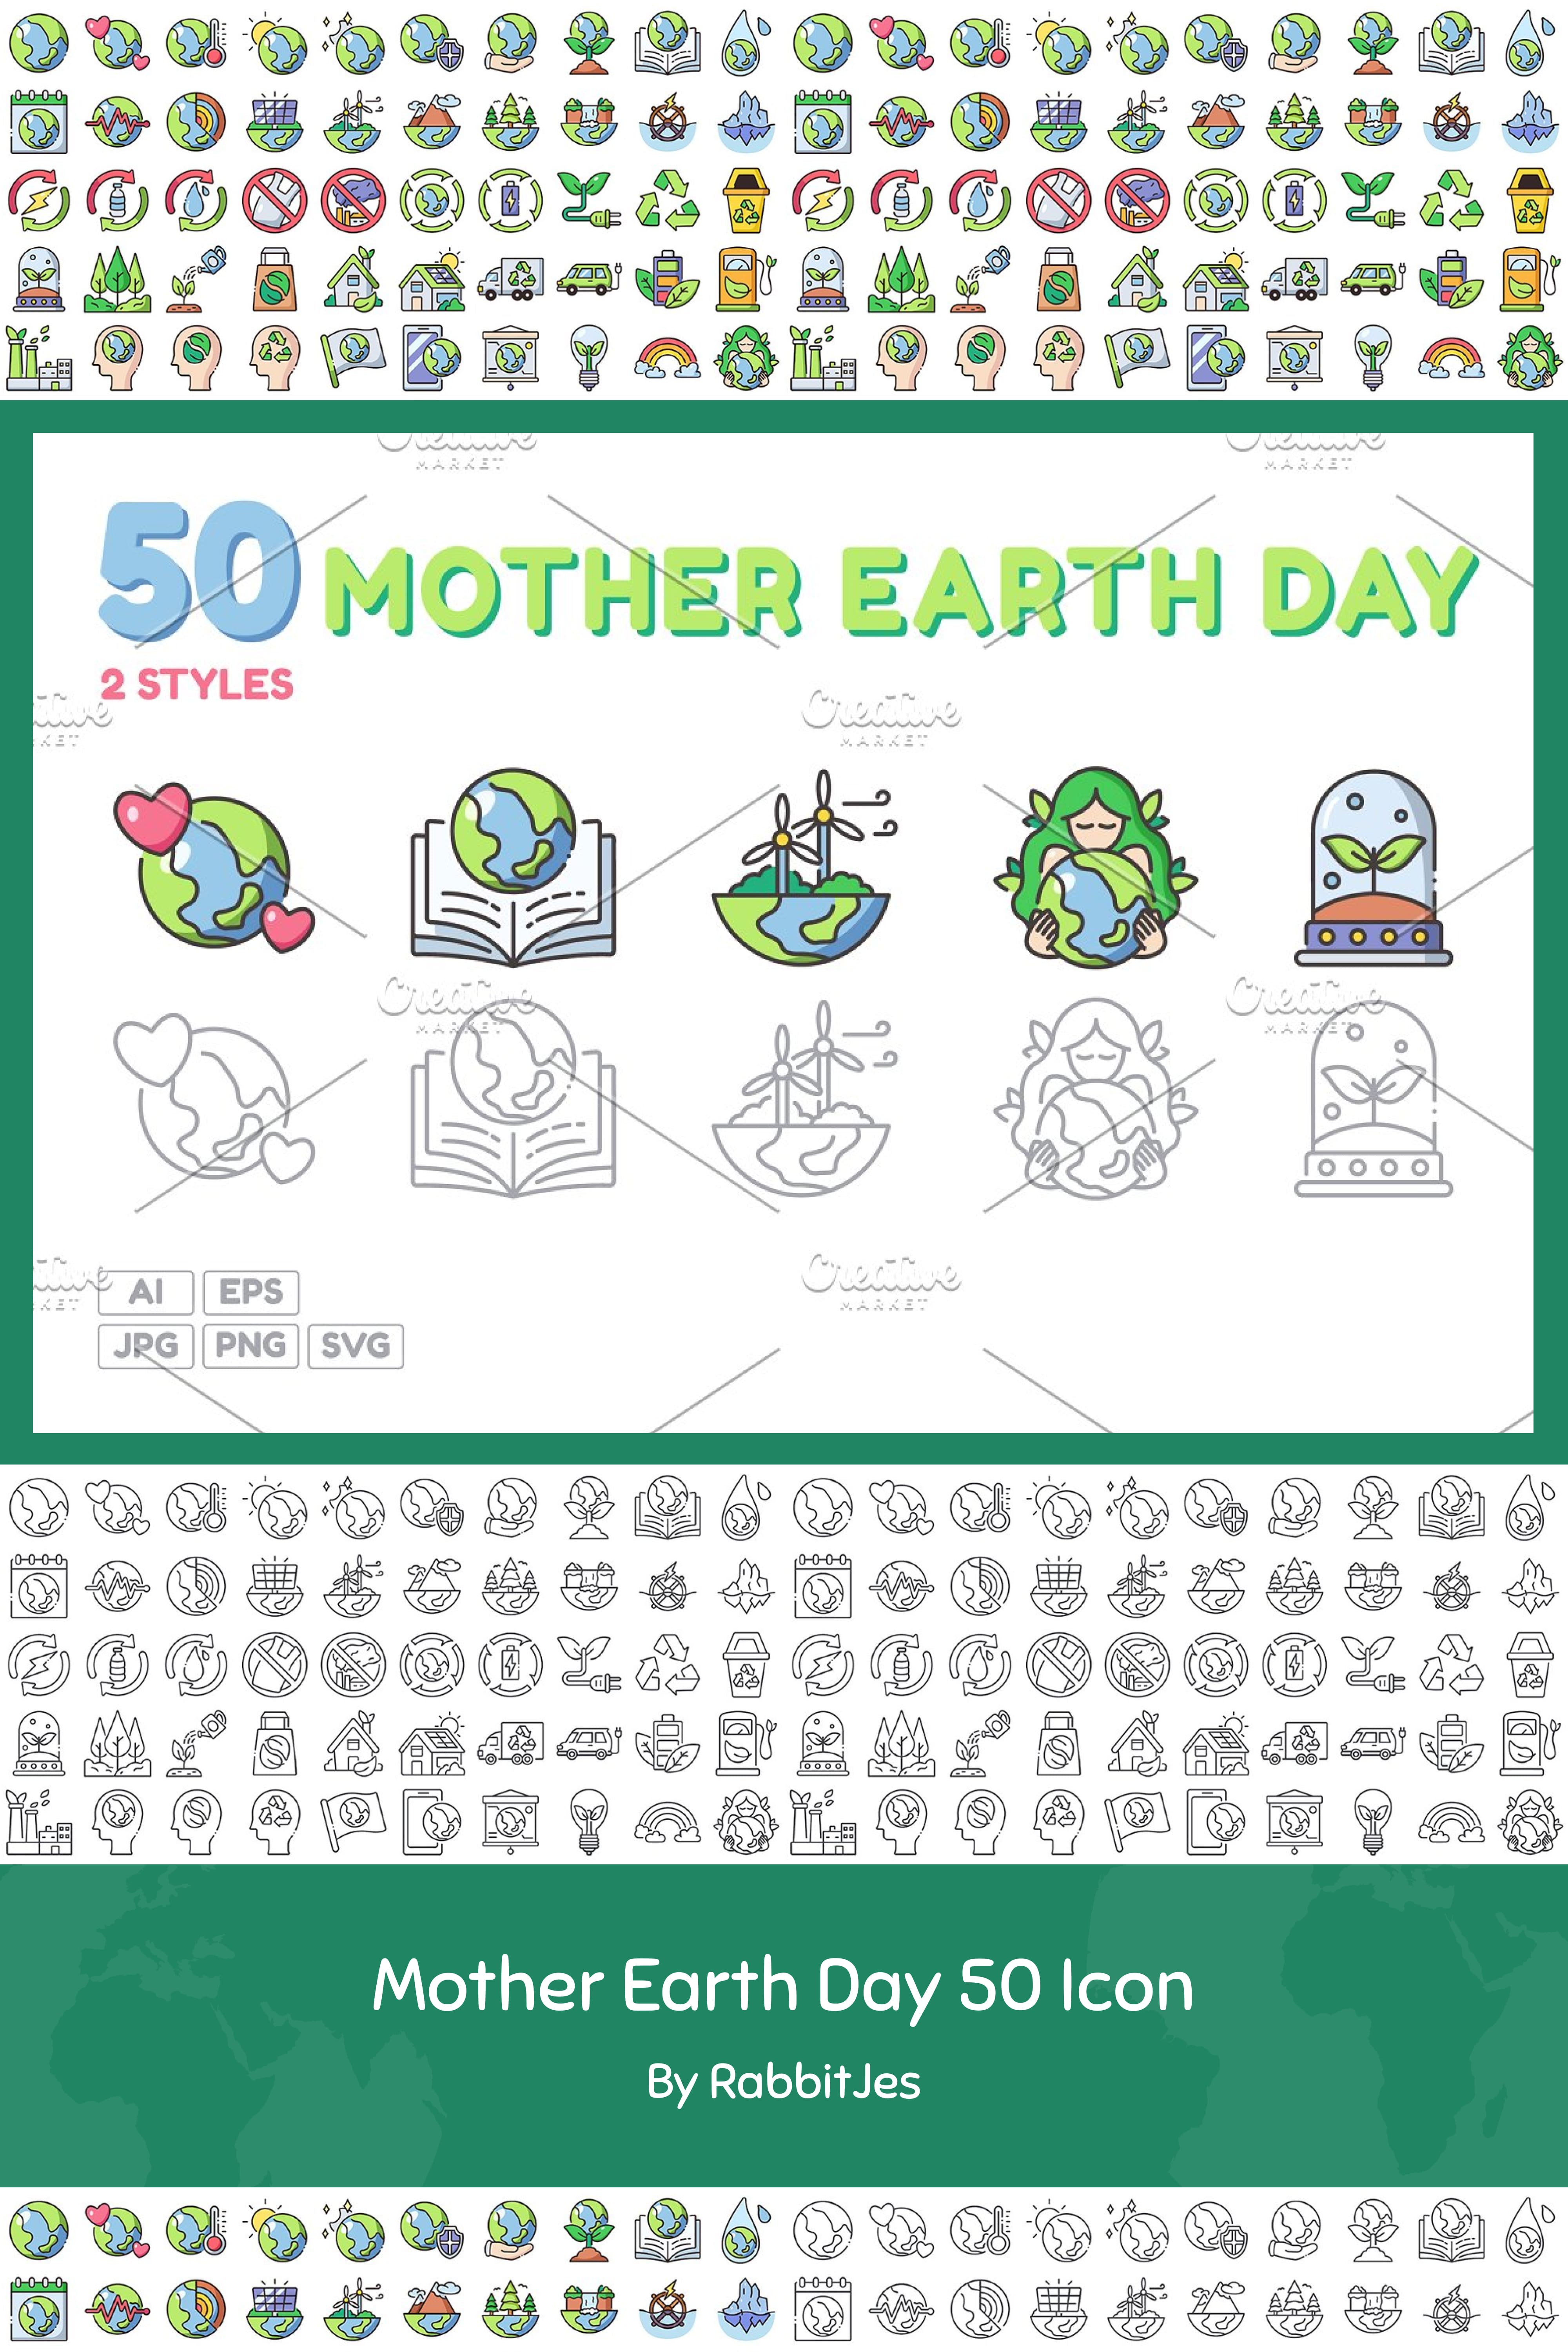 mother earth day 50 icon 03 680